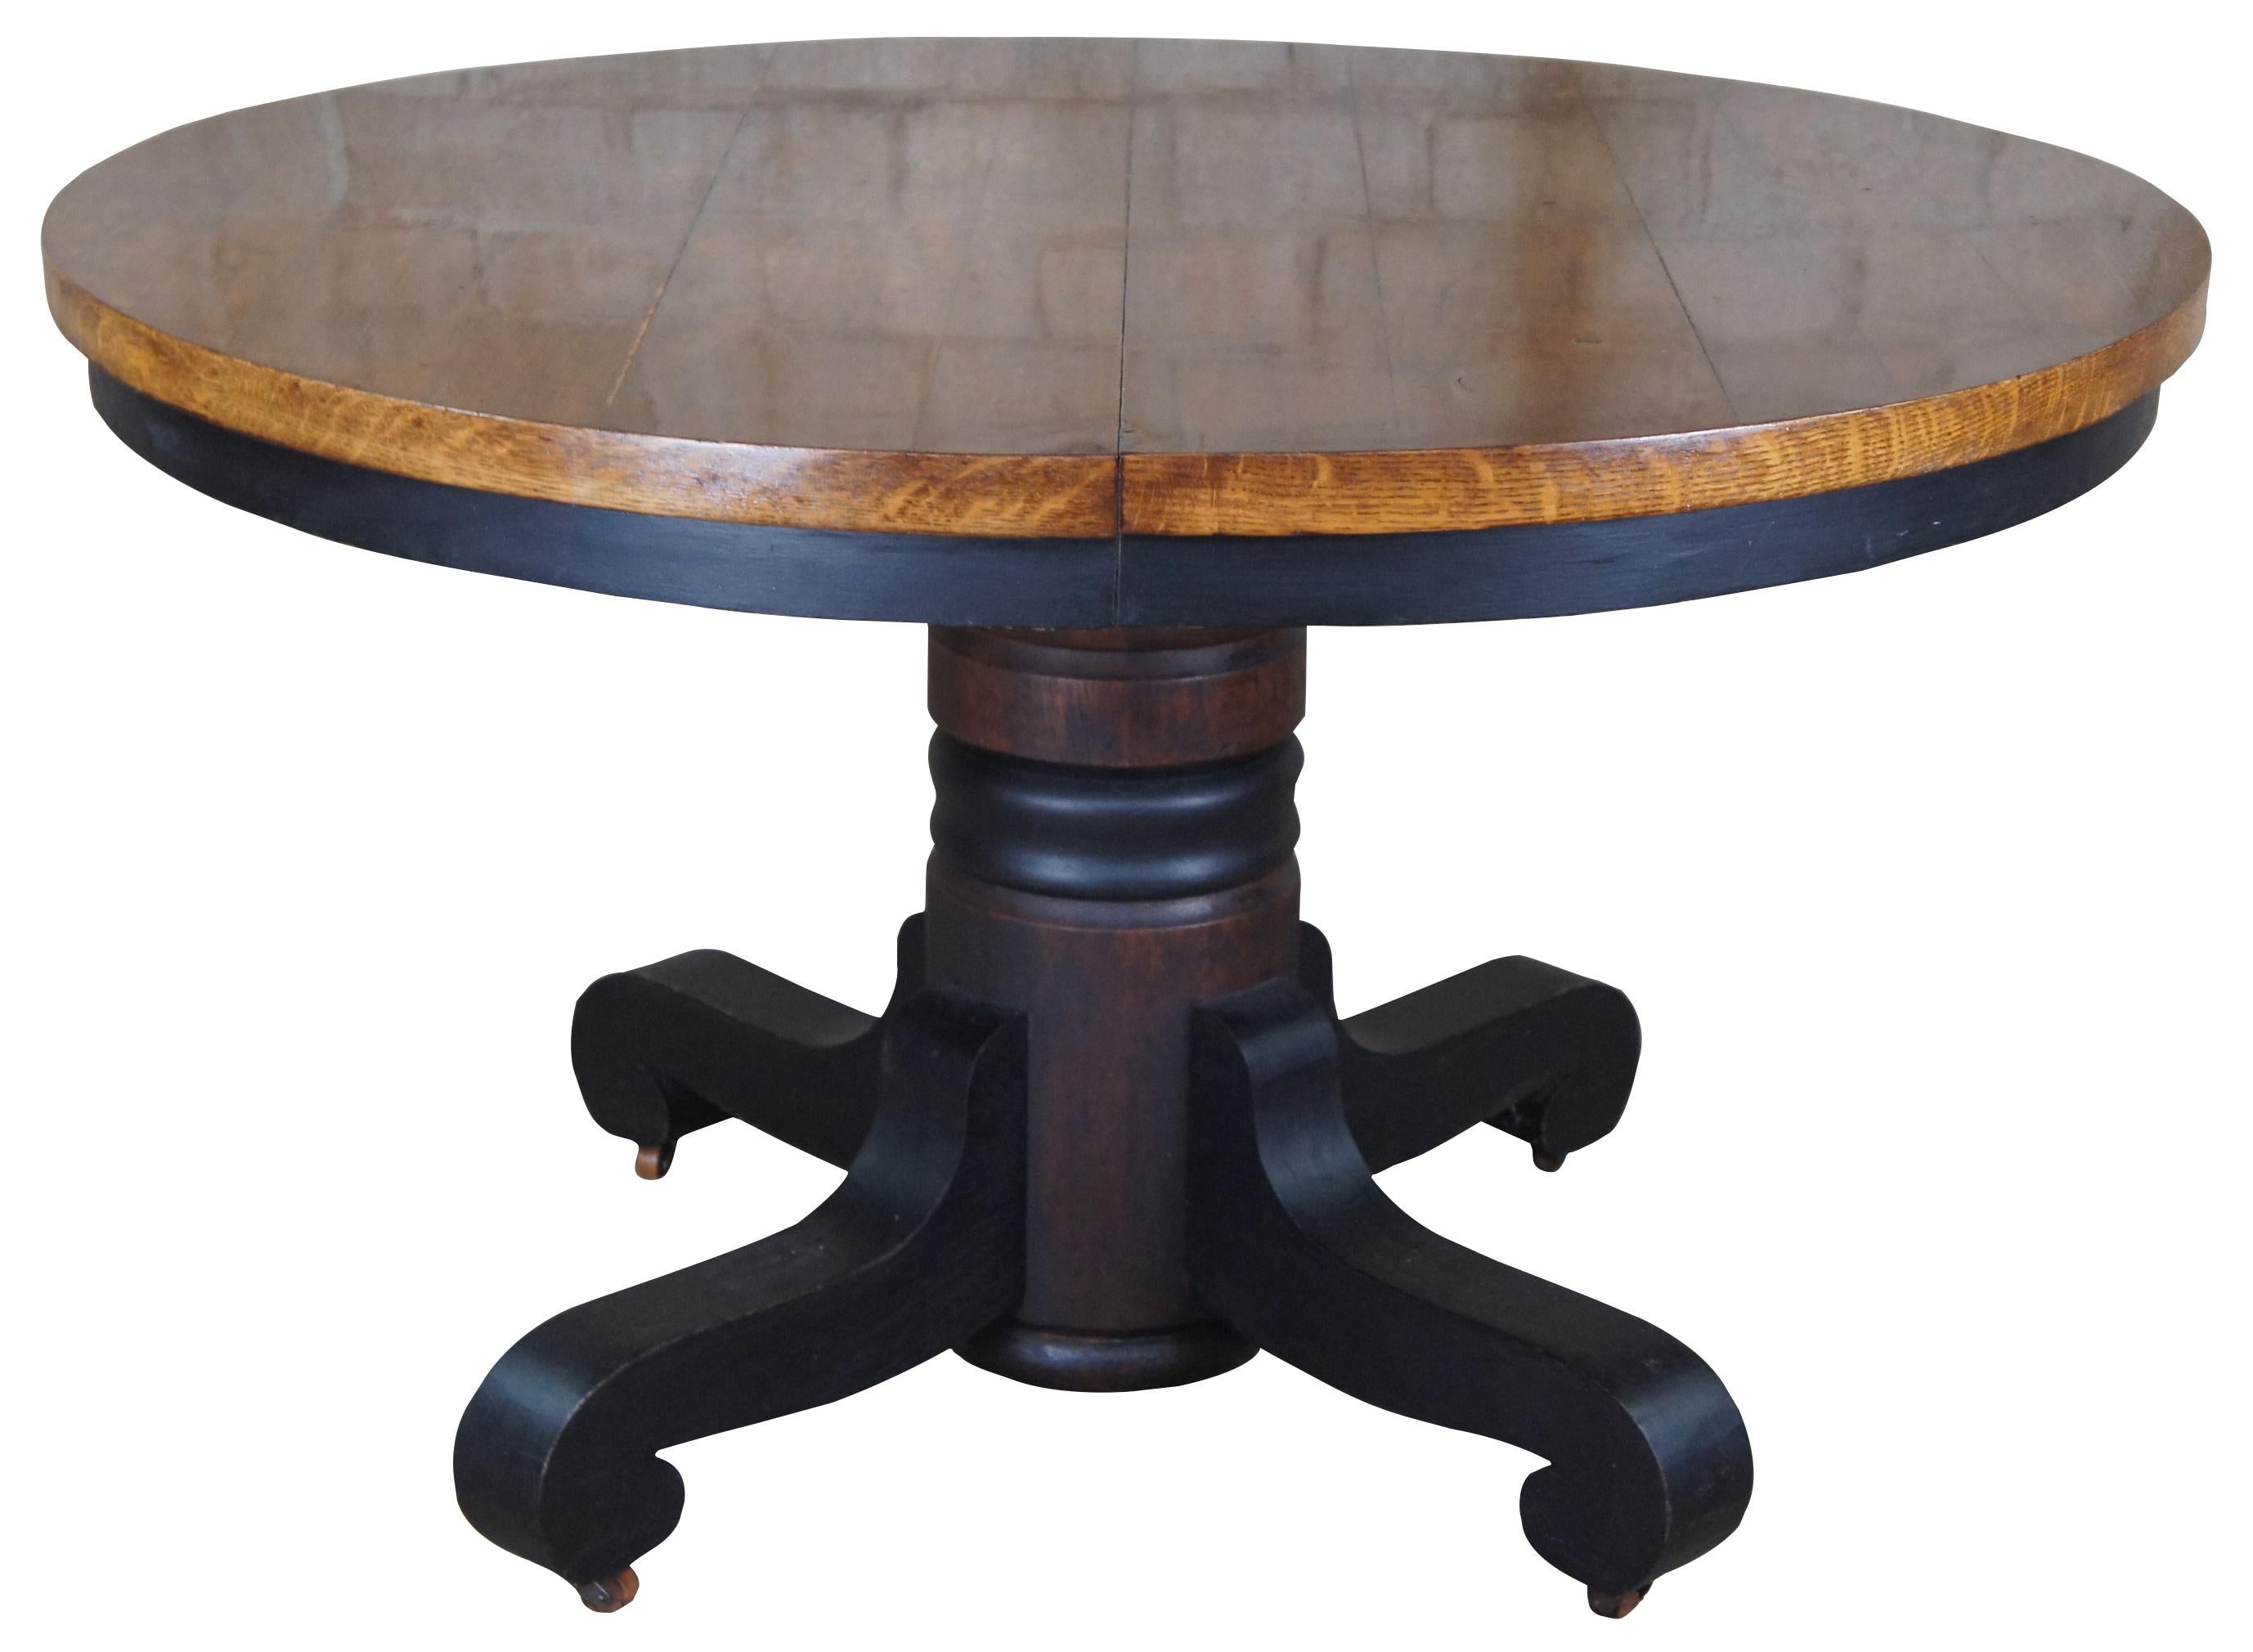 Antique Victorian round dining or breakfast table. Made of oak featuring round top and pedestal base with swivel castors.
 